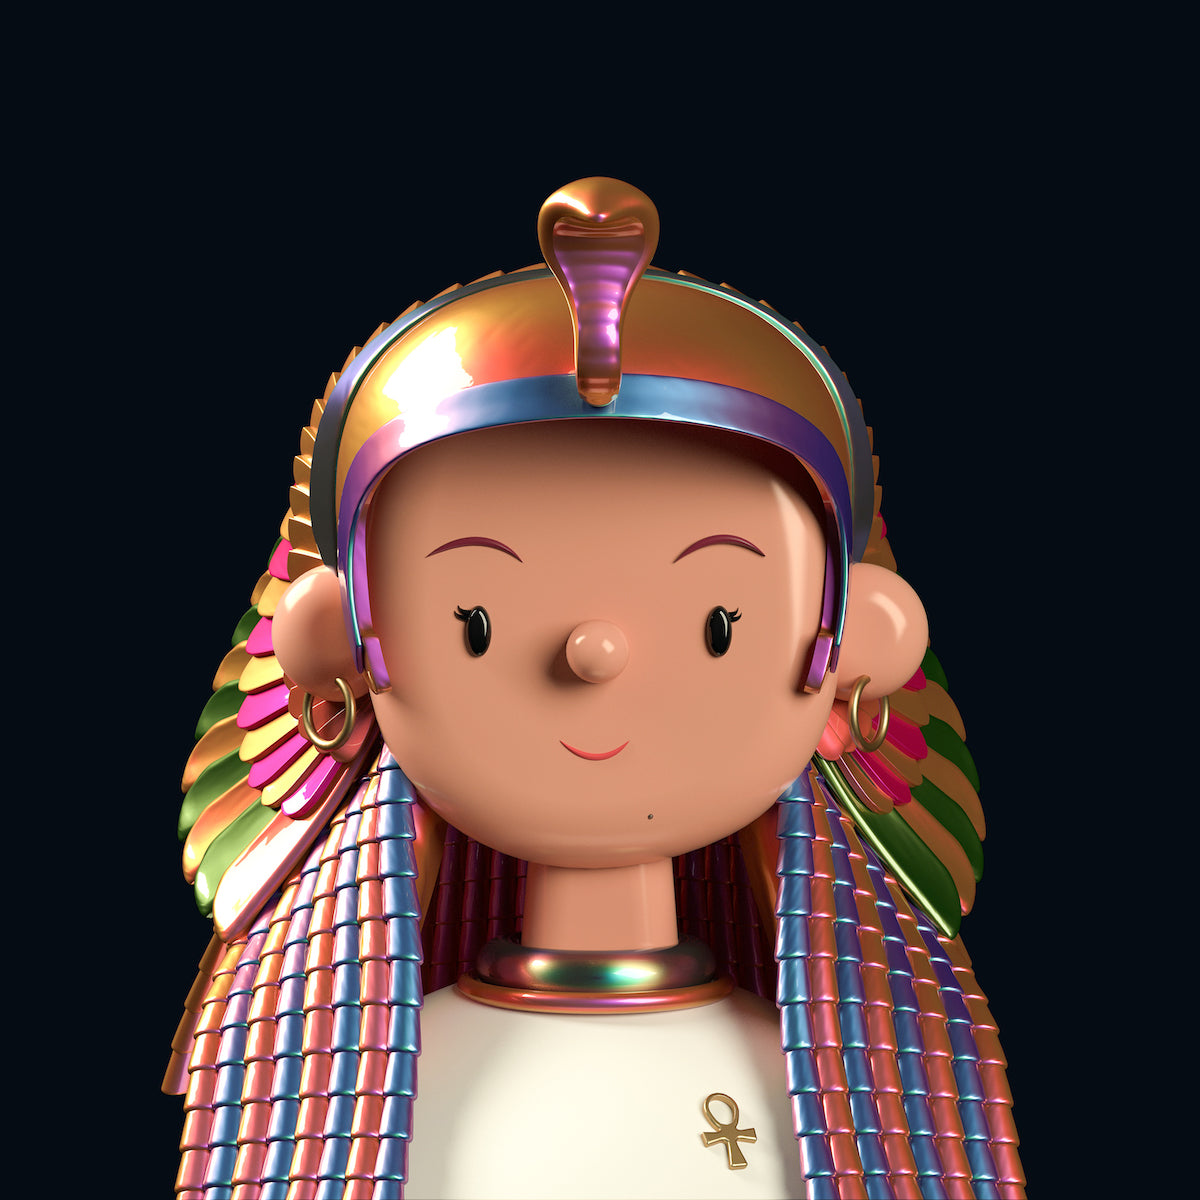 Cleopatra Toy Face by Amrit Pal Singh